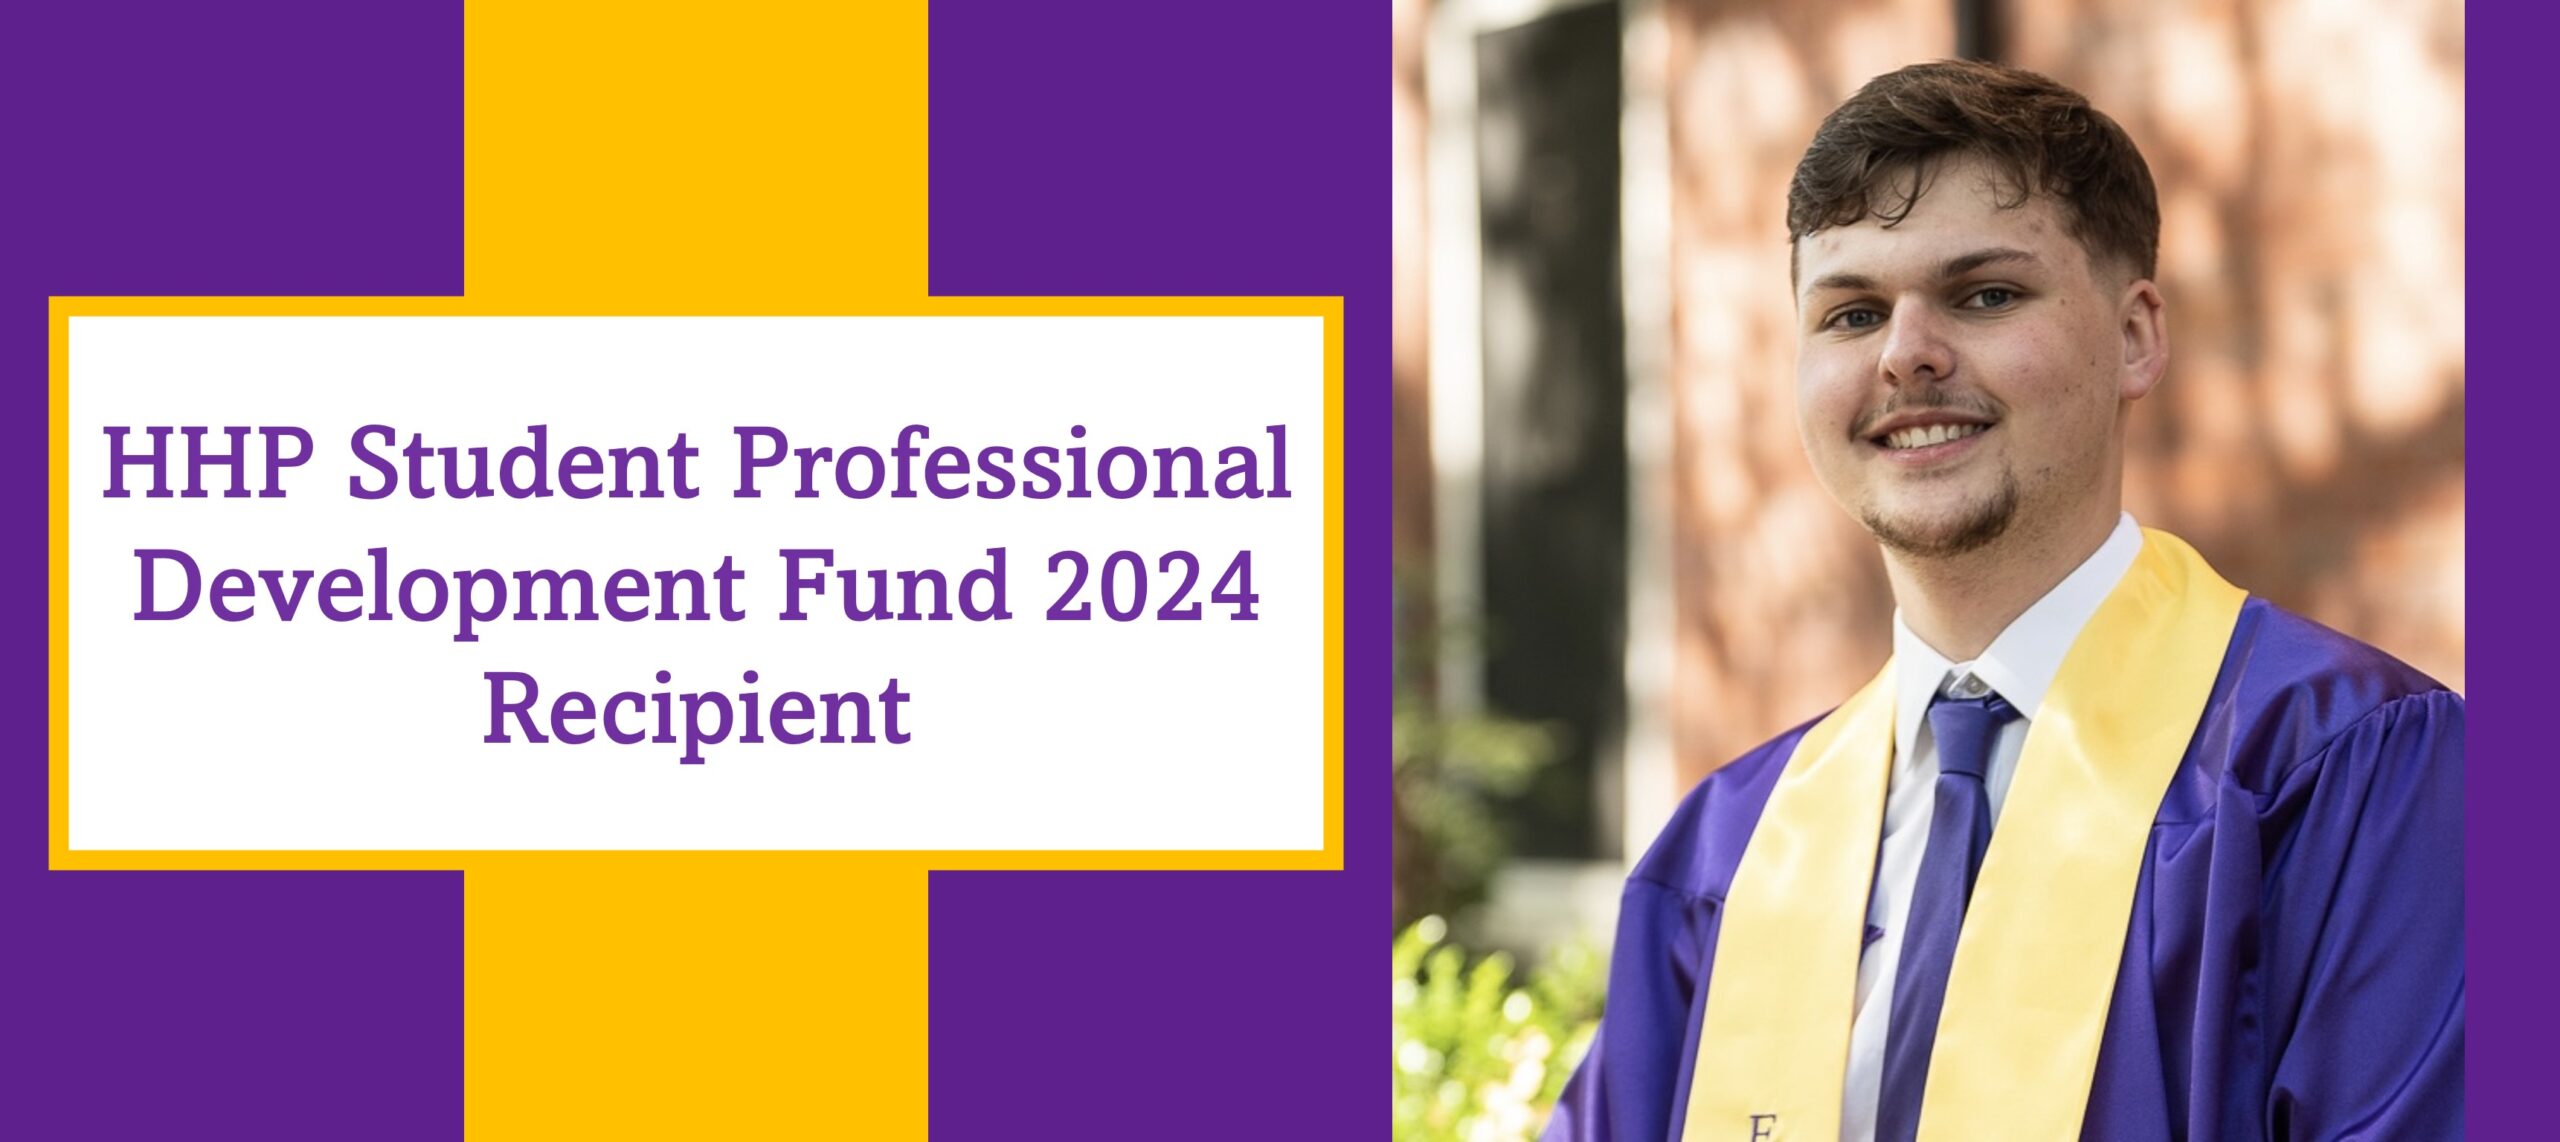 You are currently viewing MS Environmental Health Student Receives HHP Student Professional Development Fund 2024